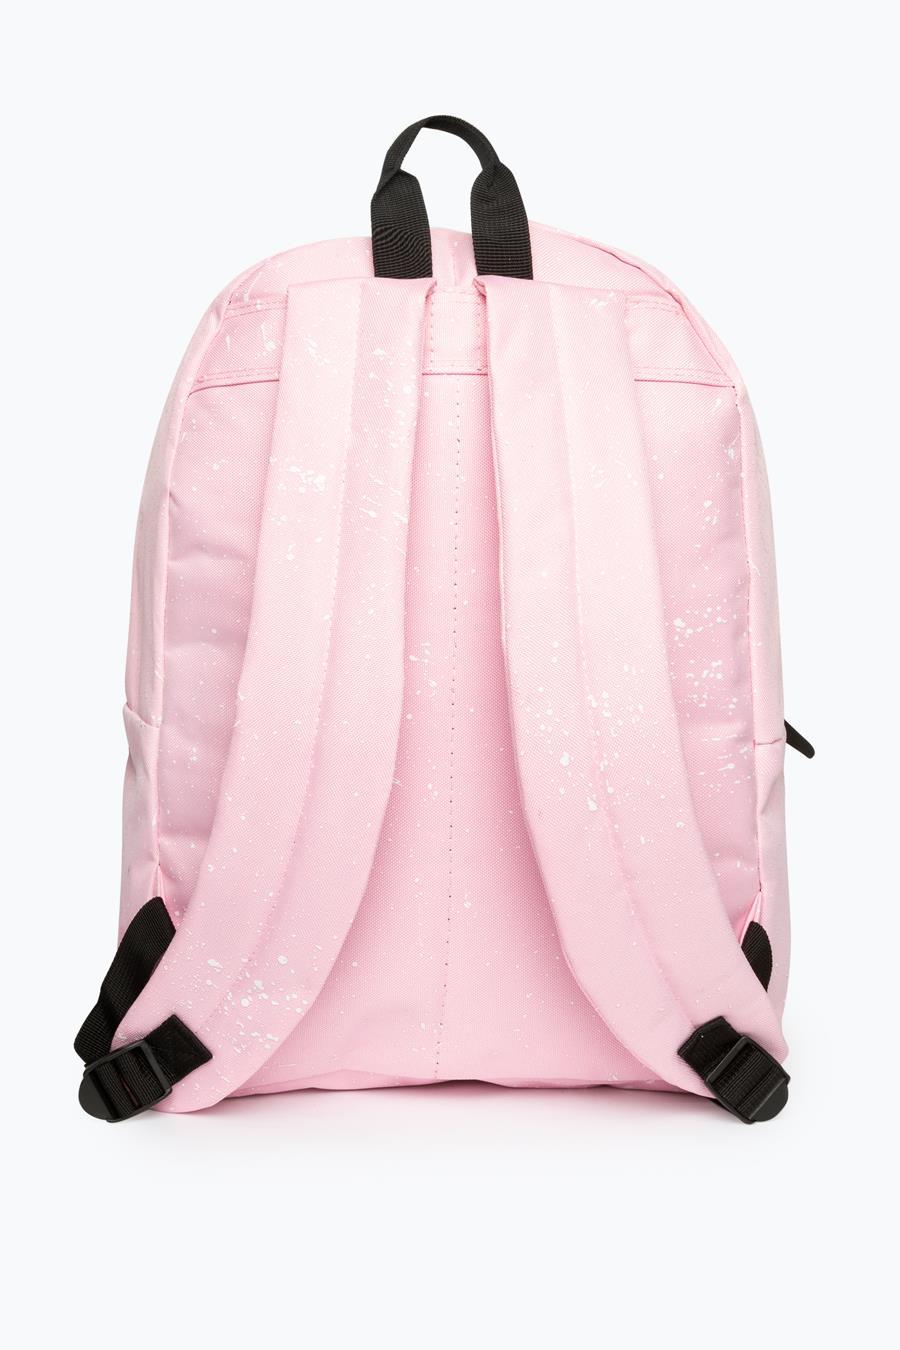 HYPE BABY PINK WITH WHITE SPECKLE BACKPACK